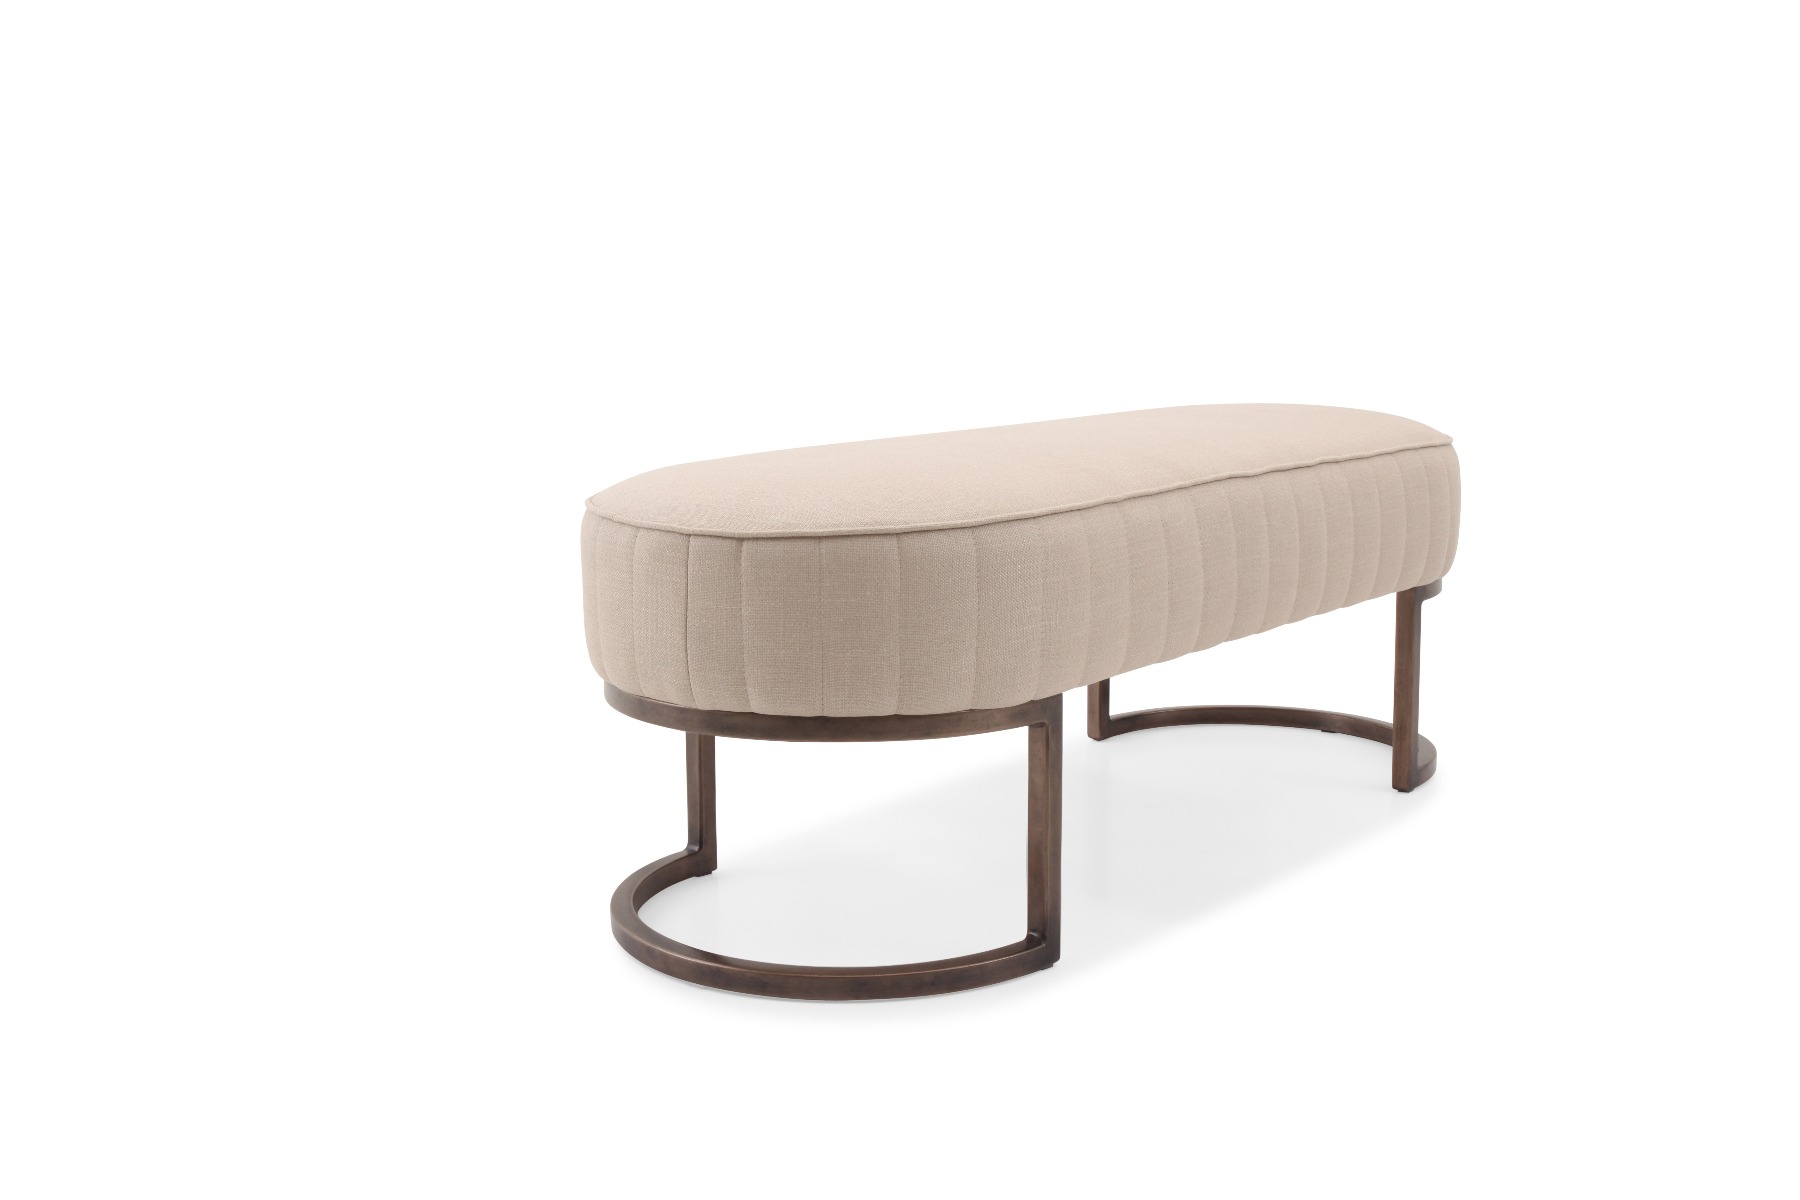 Luxury Stanmore cream bench furniture by Luxuria London